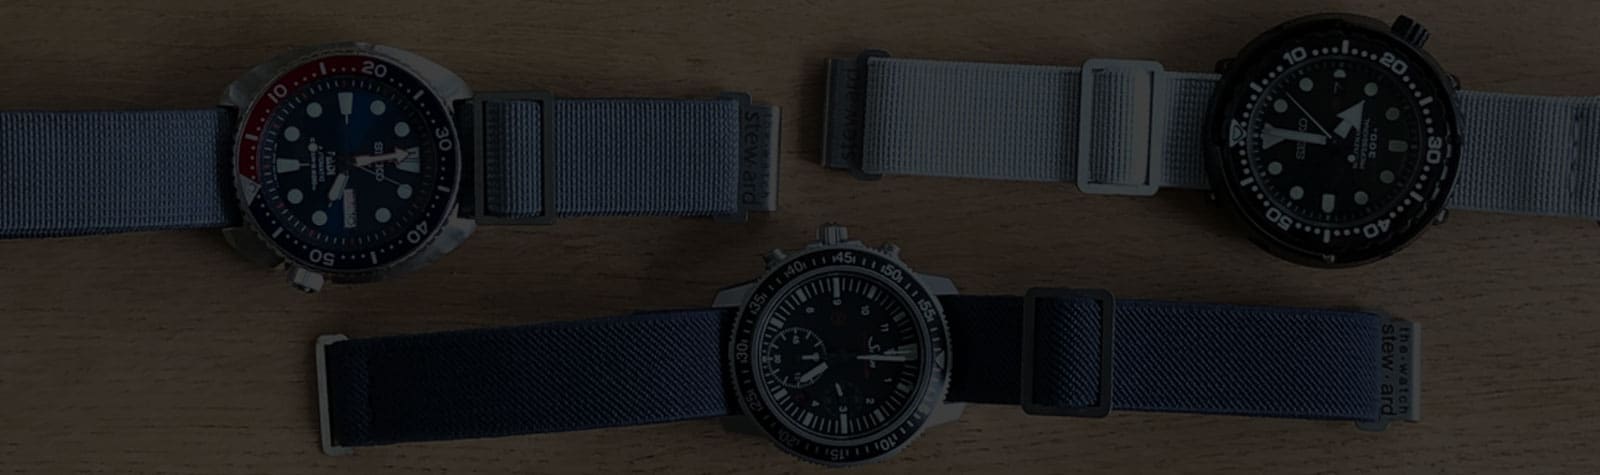 PRODUCT REVIEW: The Watch Steward Strap